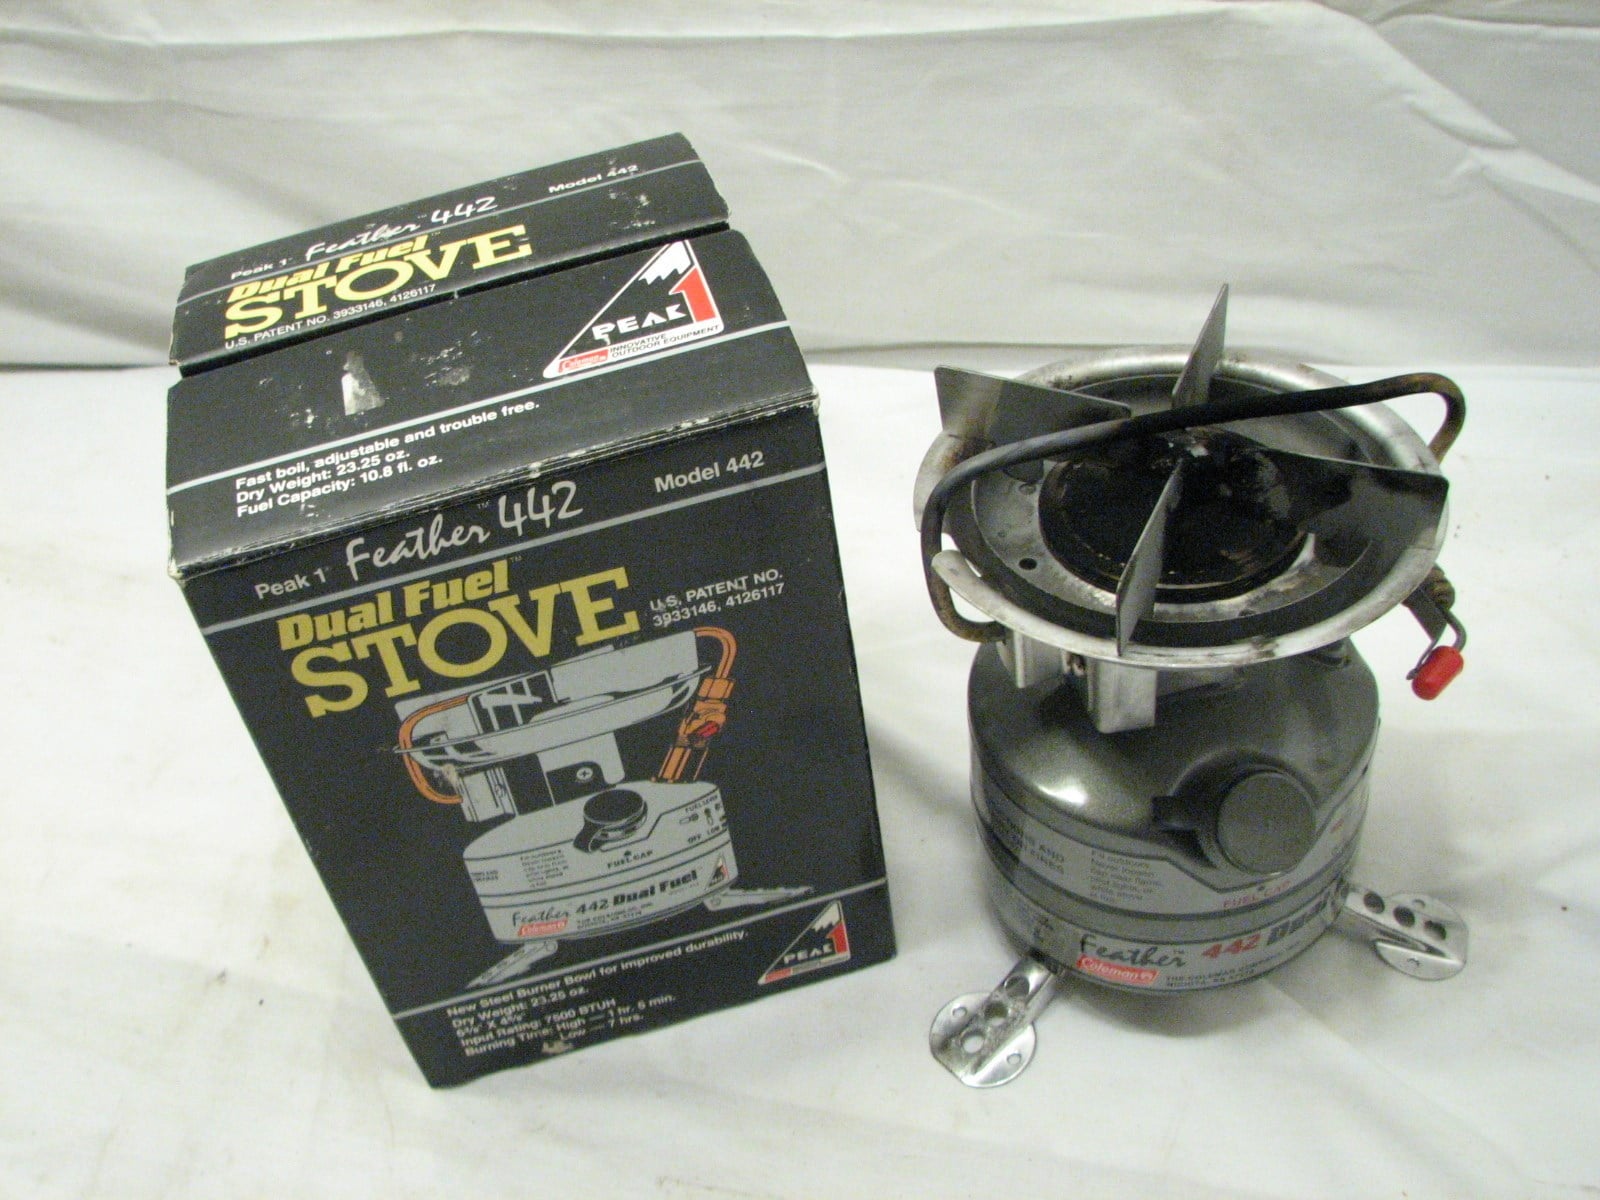 Moto Camping Review / Moto Camping Gear Review: Coleman dual-fuel stove -  Adventure Rider